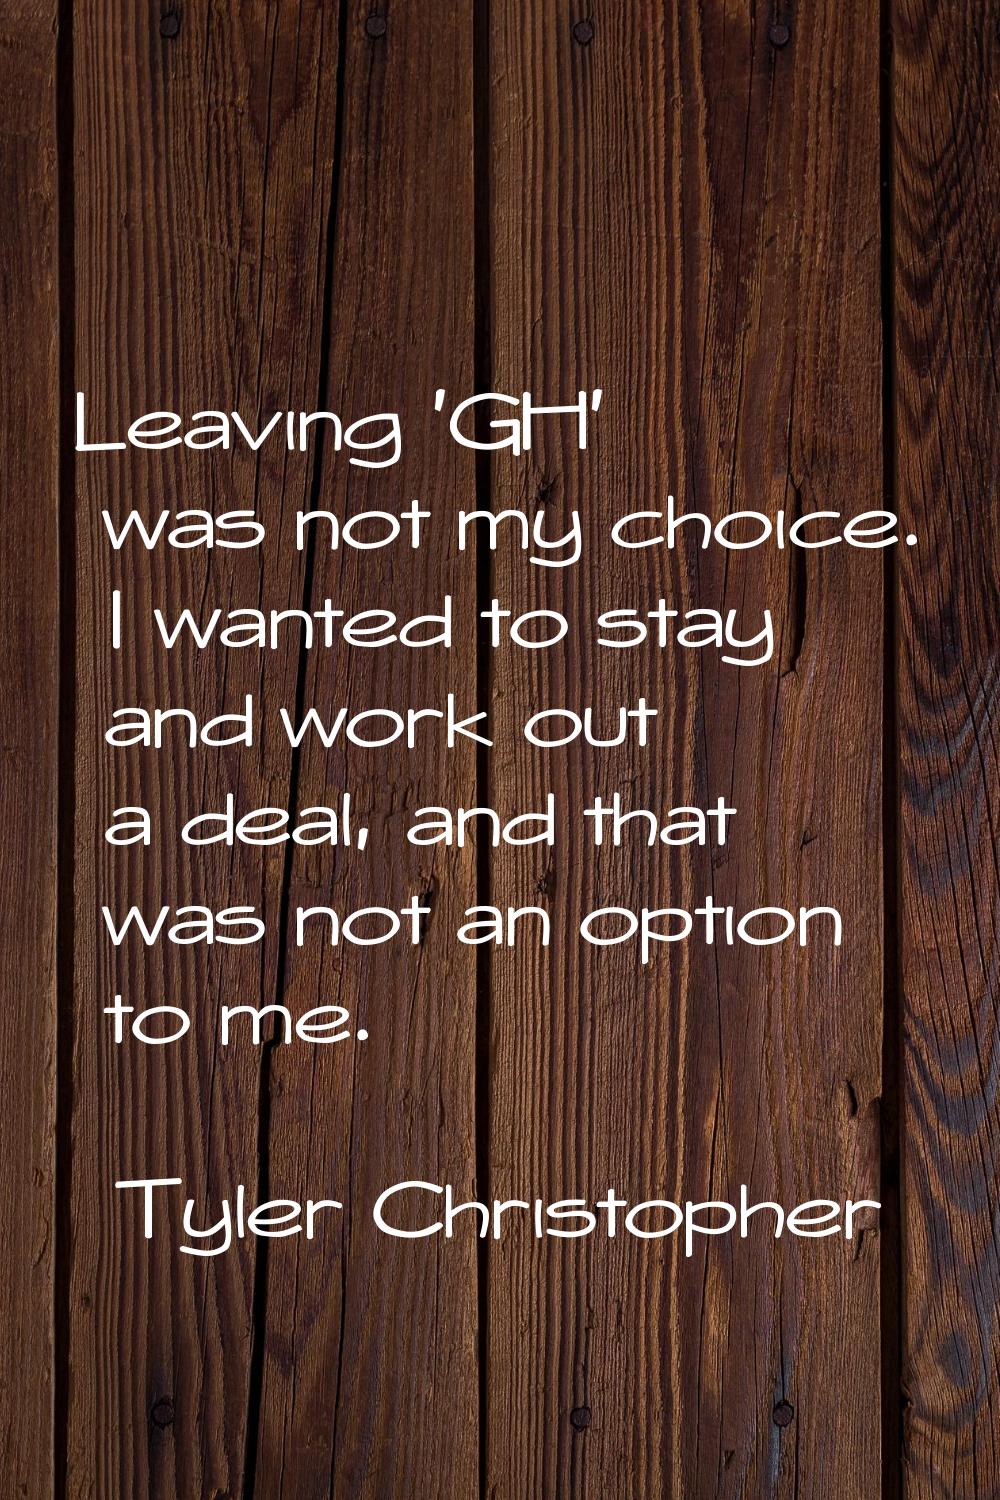 Leaving 'GH' was not my choice. I wanted to stay and work out a deal, and that was not an option to